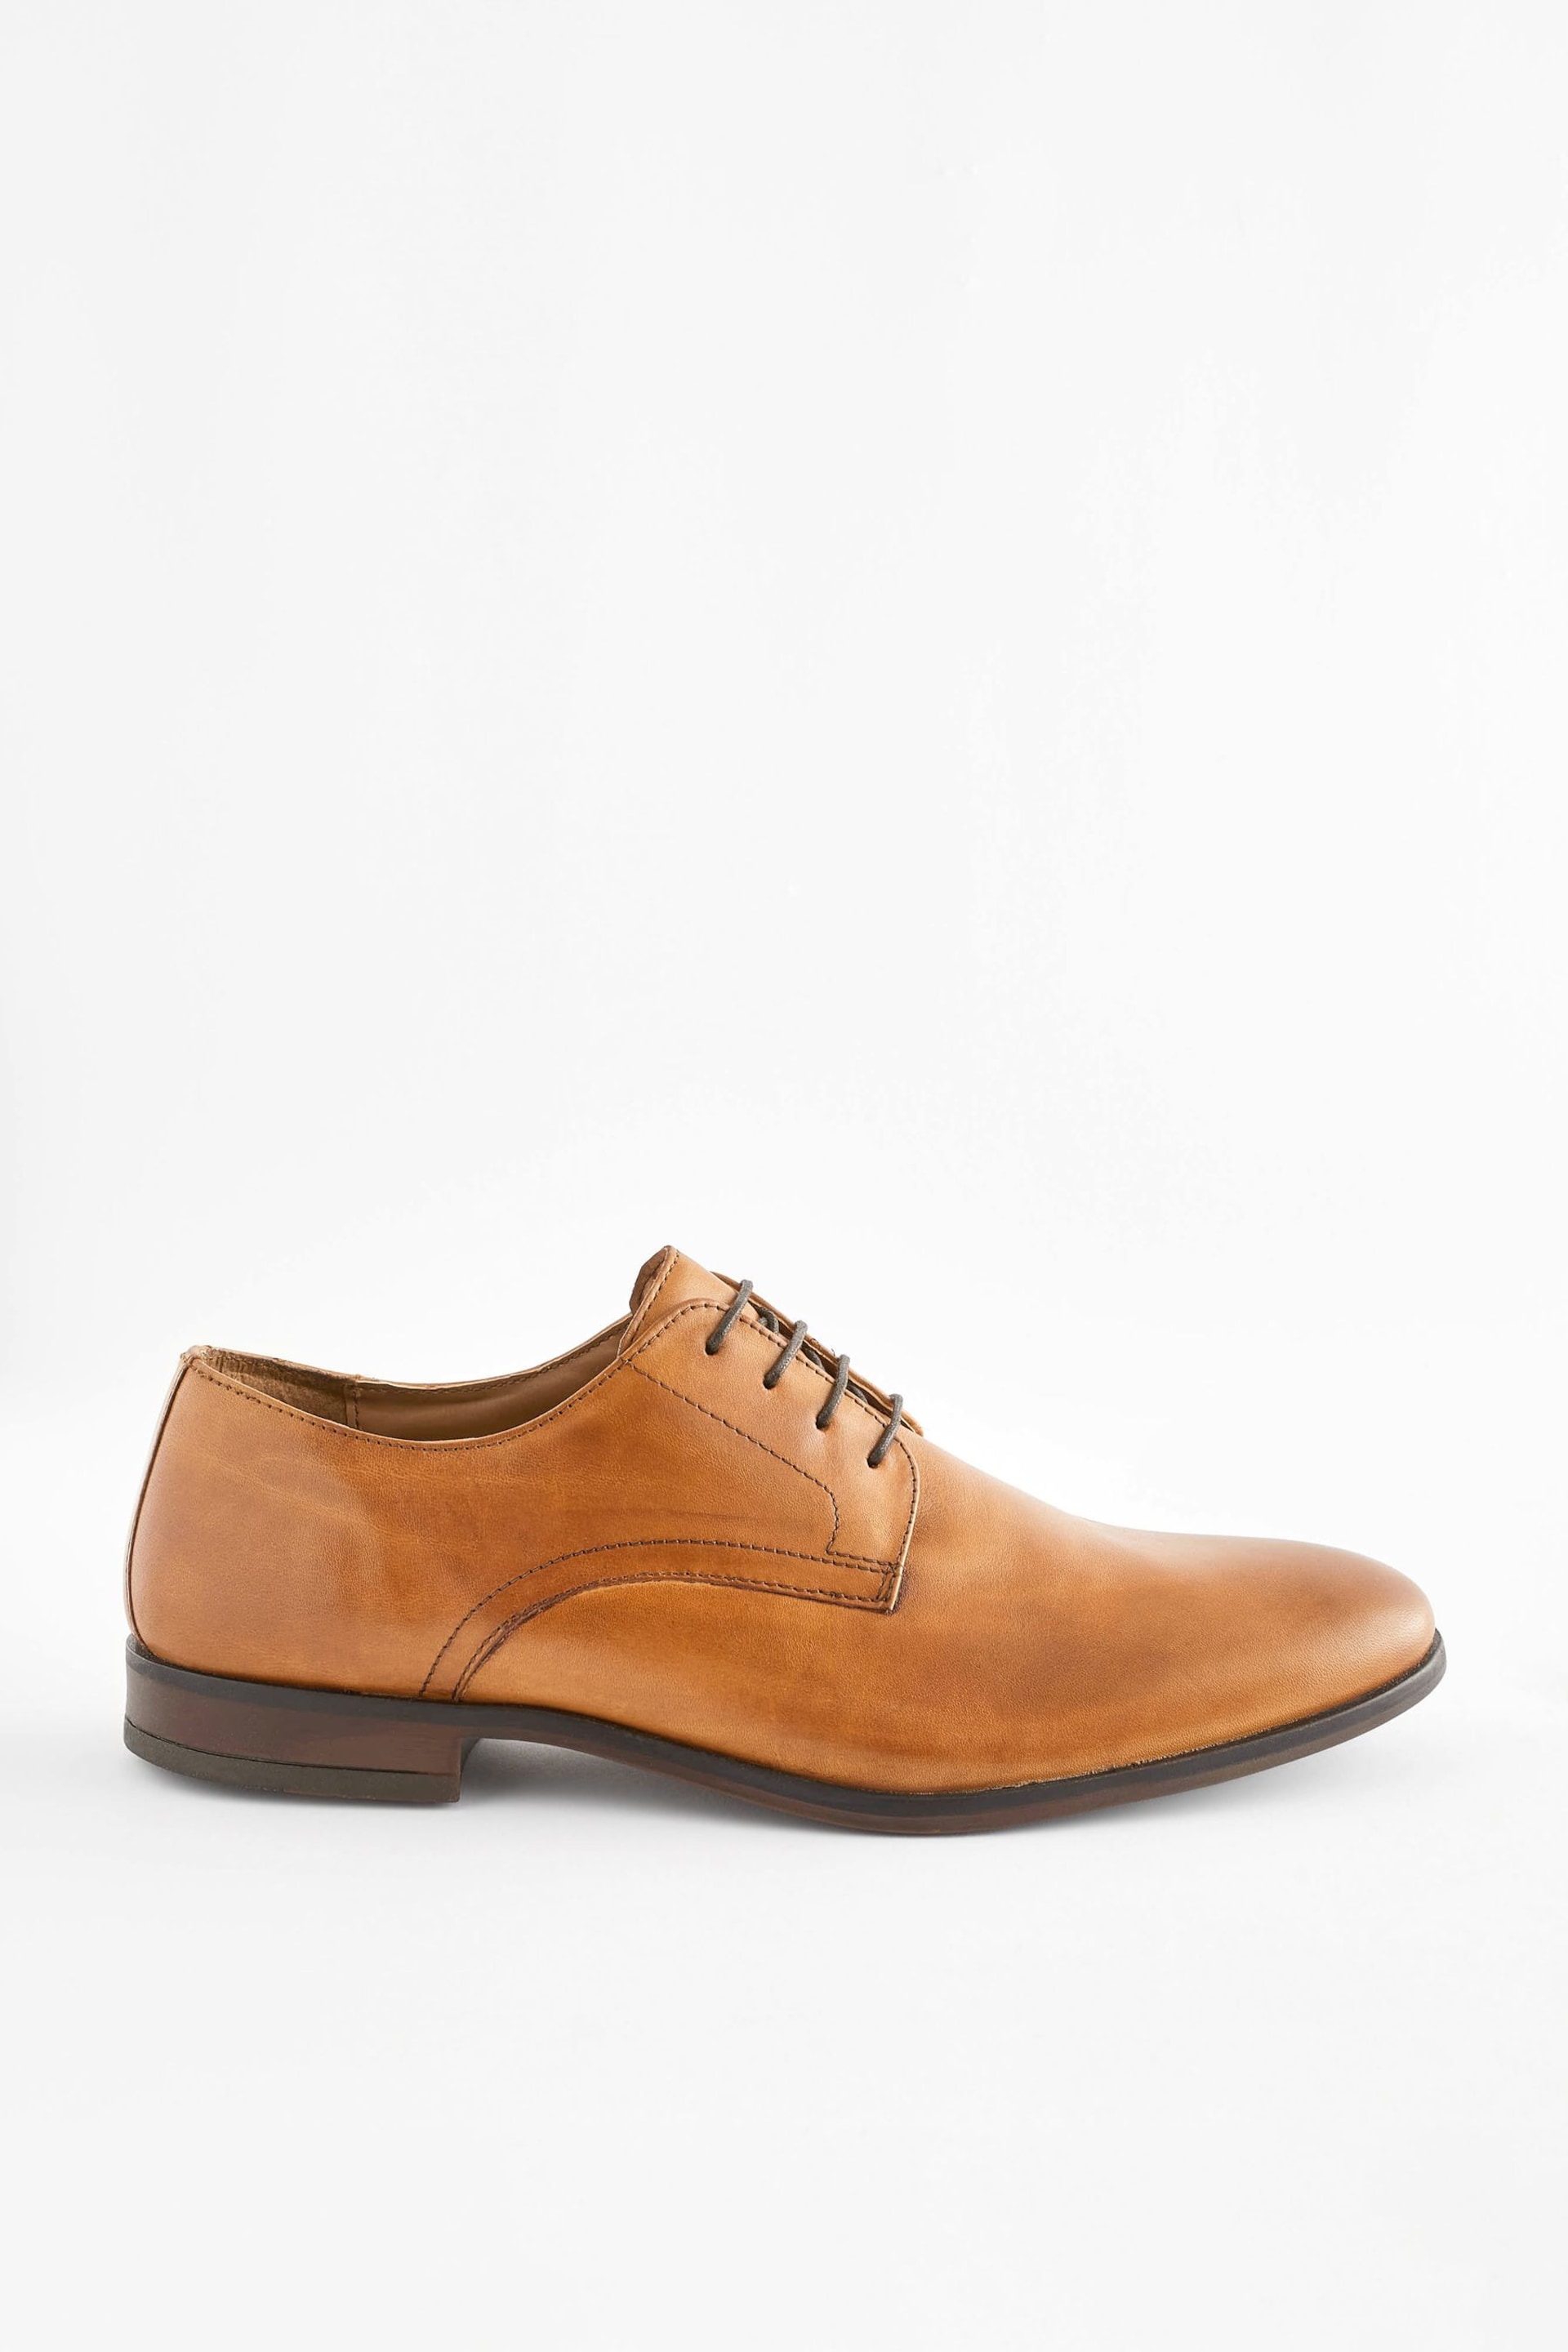 Tan Brown Leather Round Toe Derby Shoes - Image 2 of 6